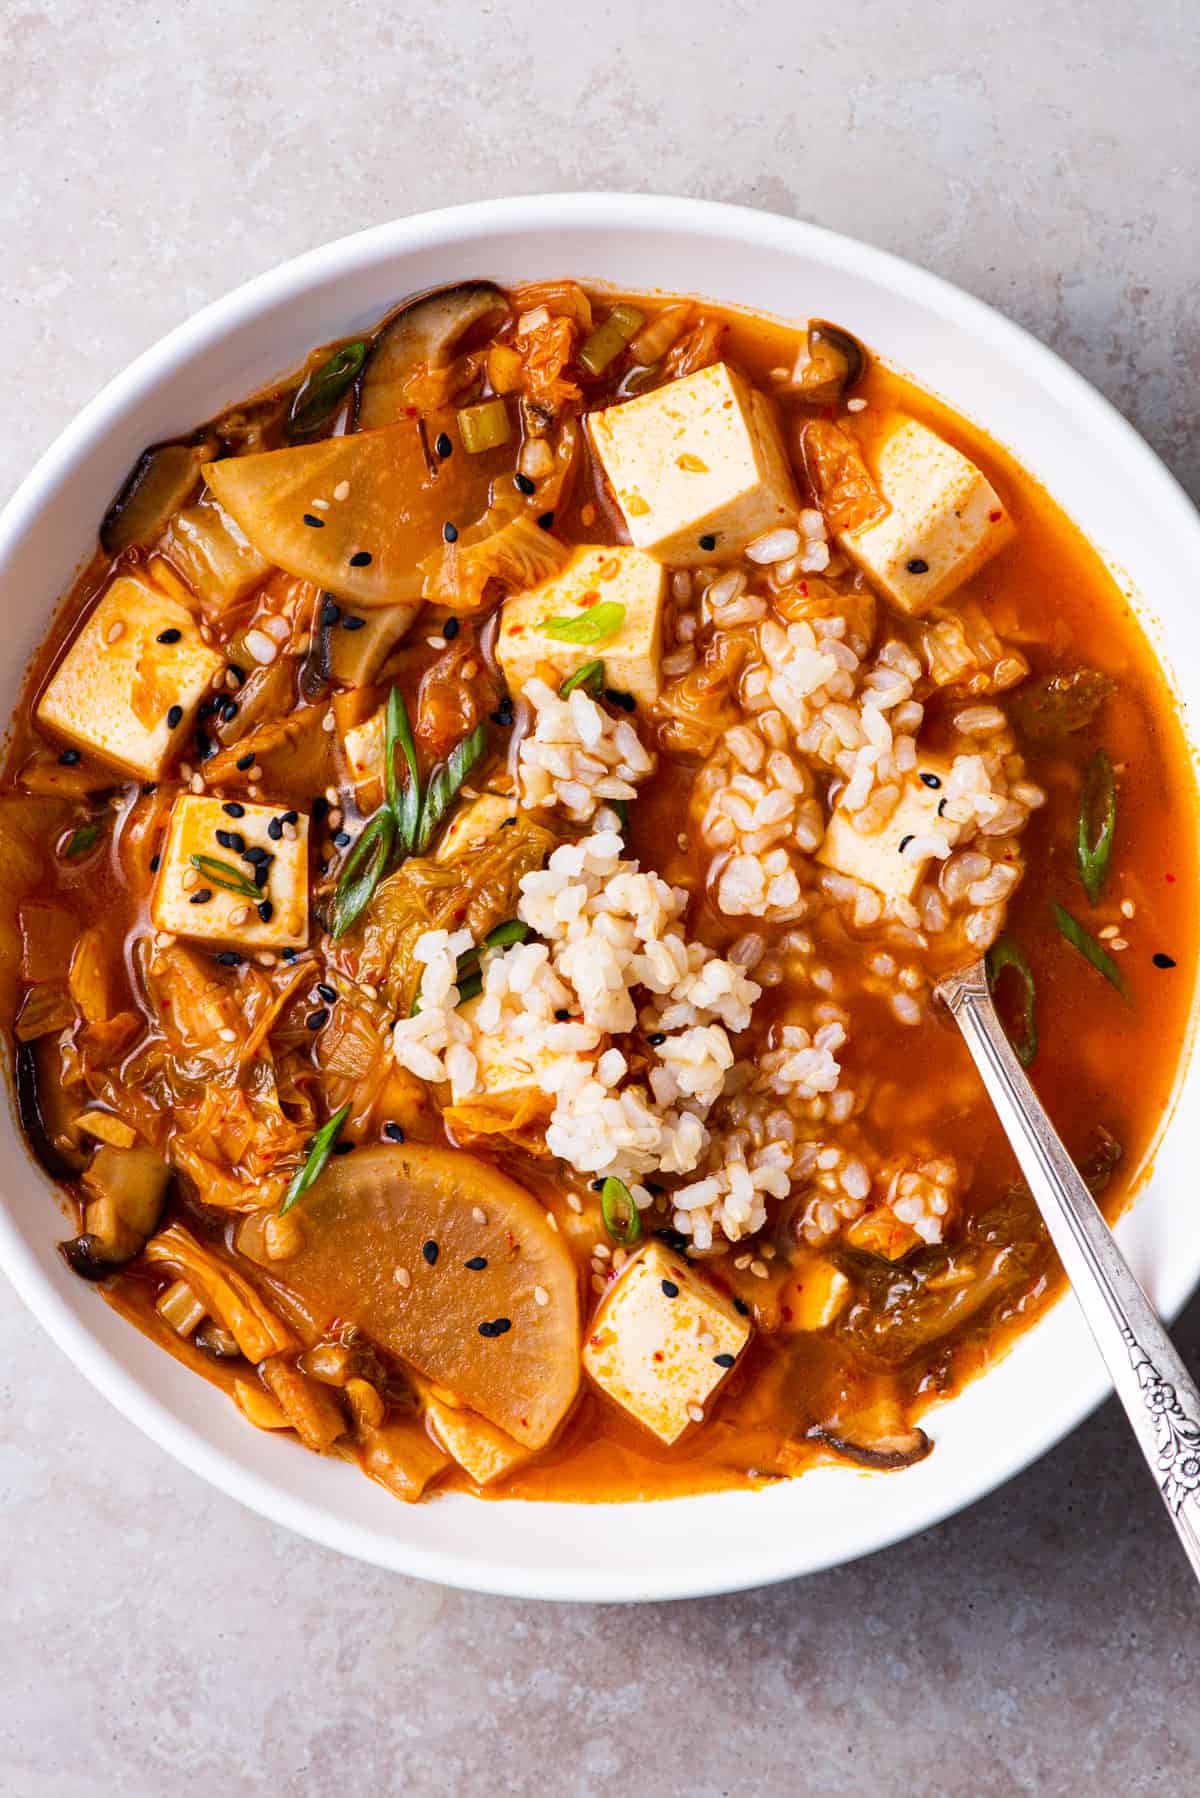 Vegan tofu kimchi soup with daikon, served with brown rice and scallions.